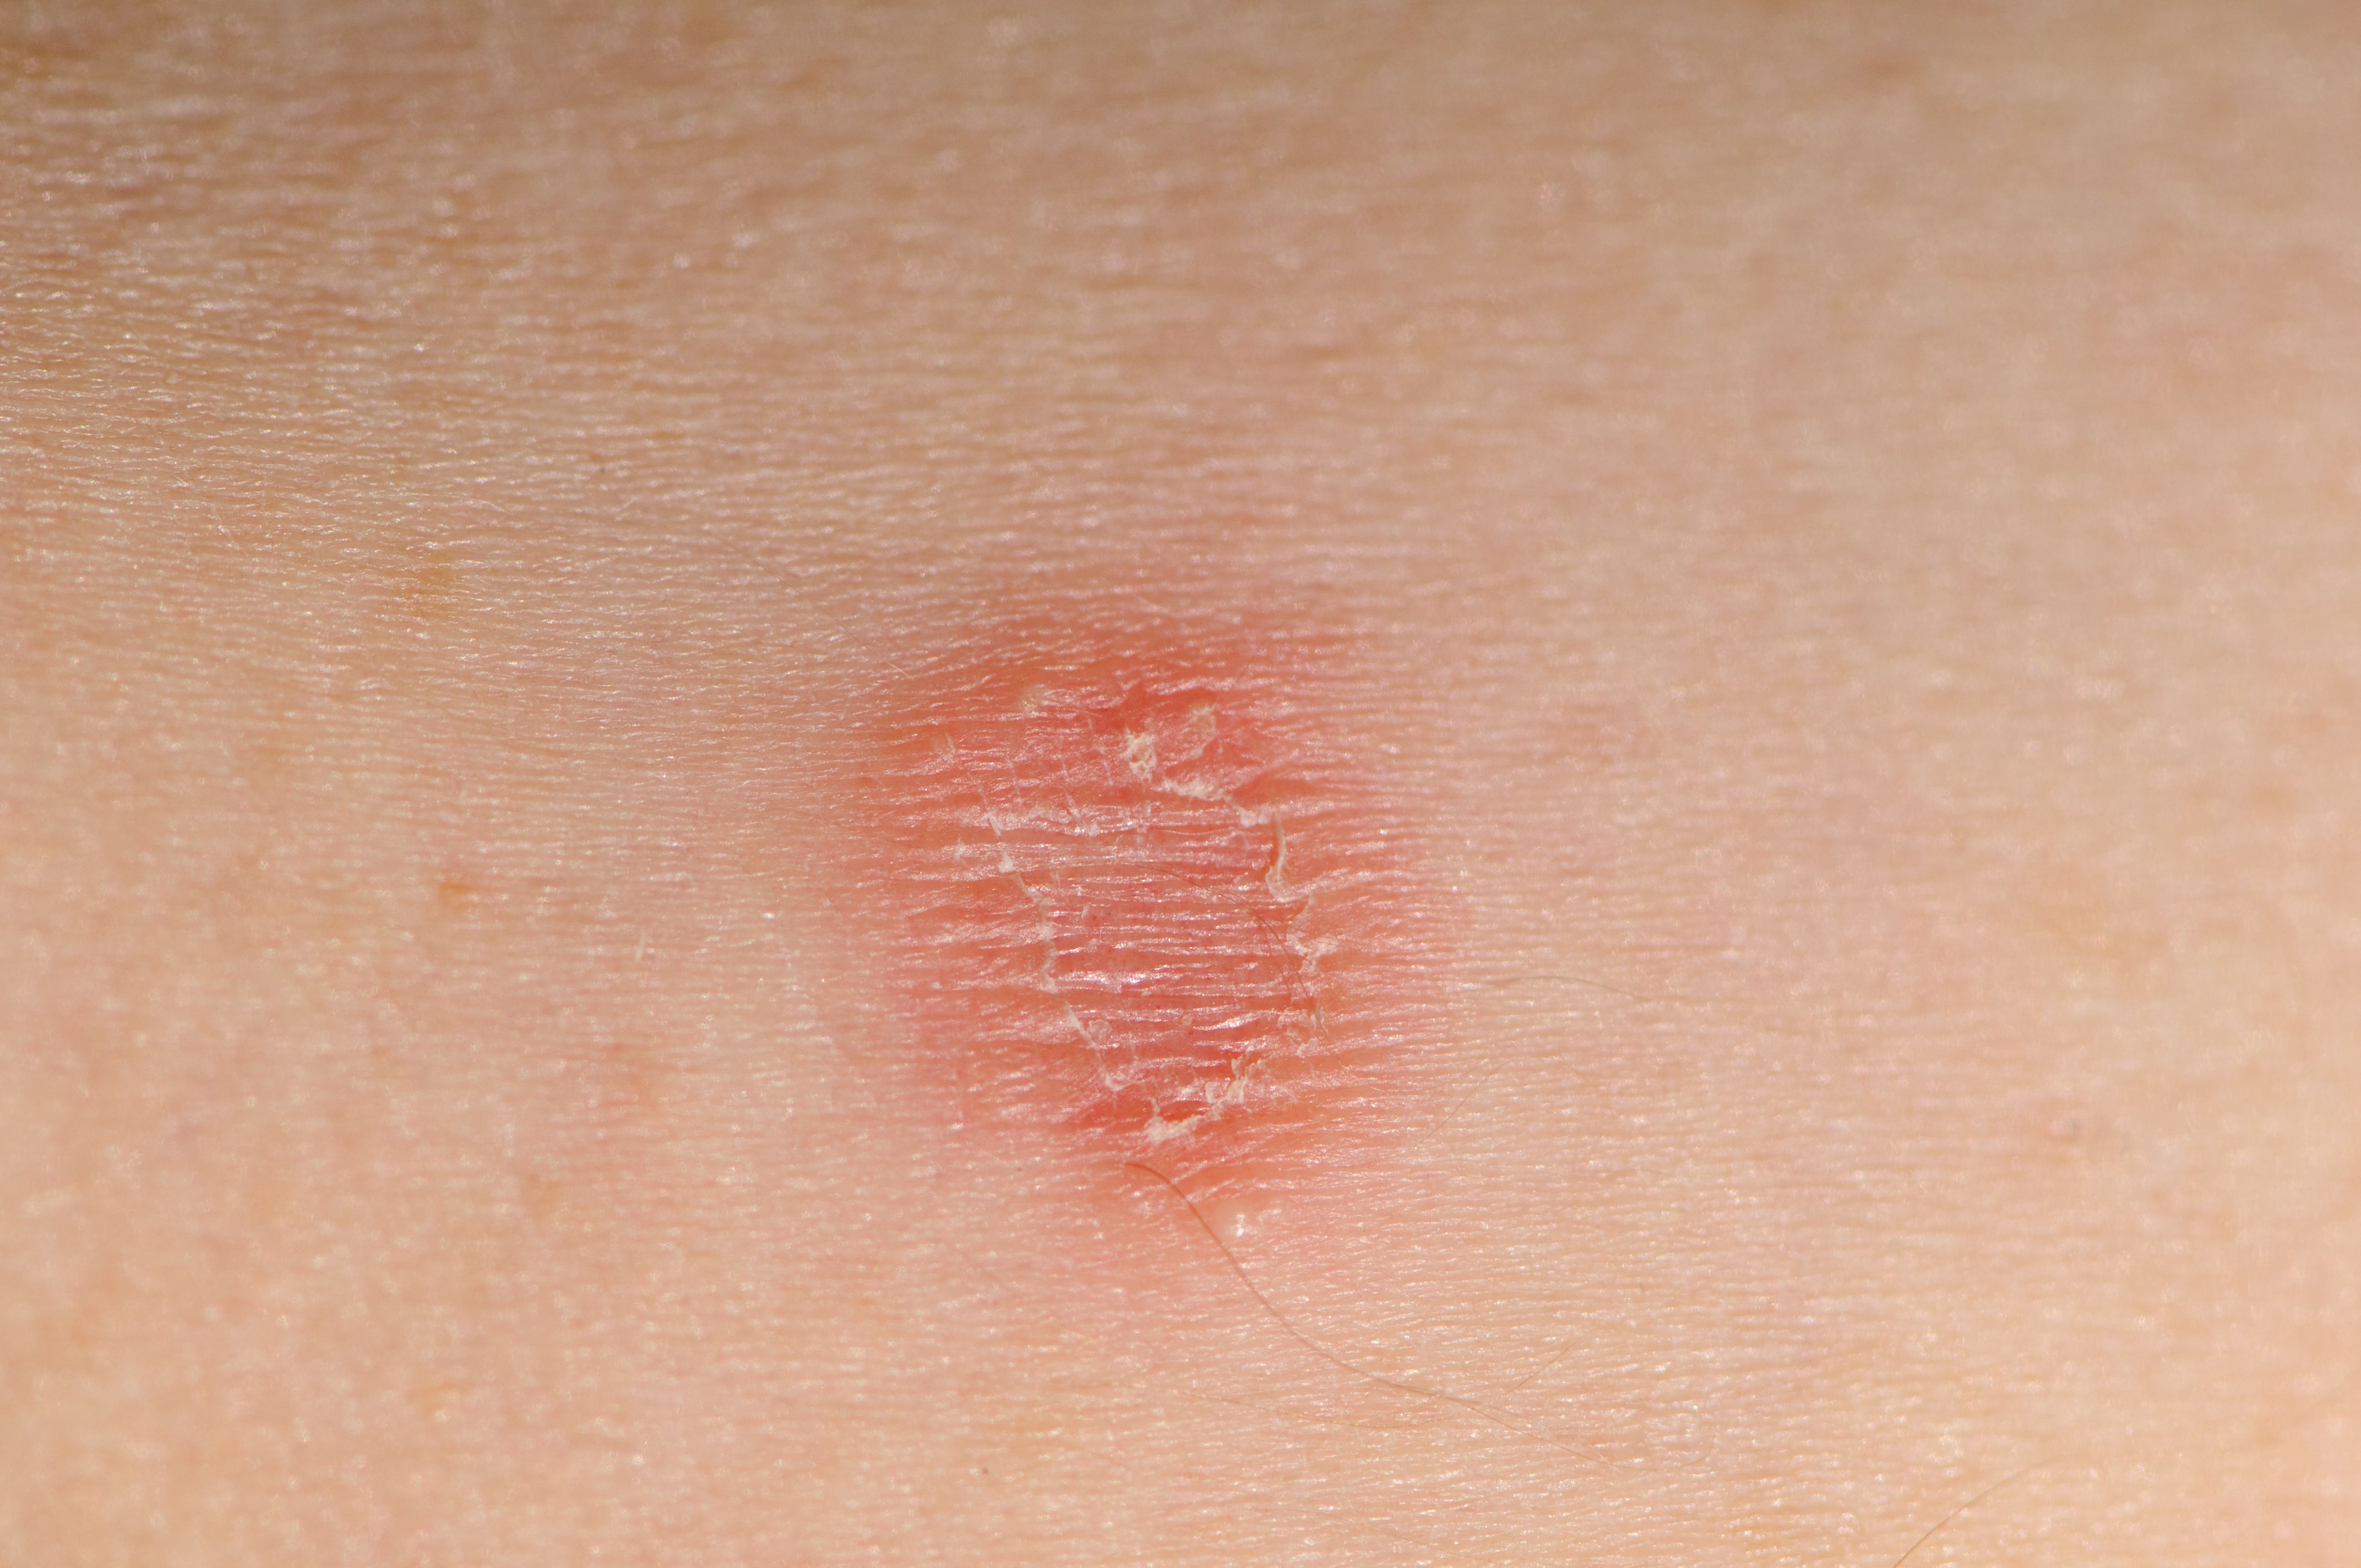 Red Spots On Skin: Top 19 Causes (with Pictures & Treatment) - Tua Saúde